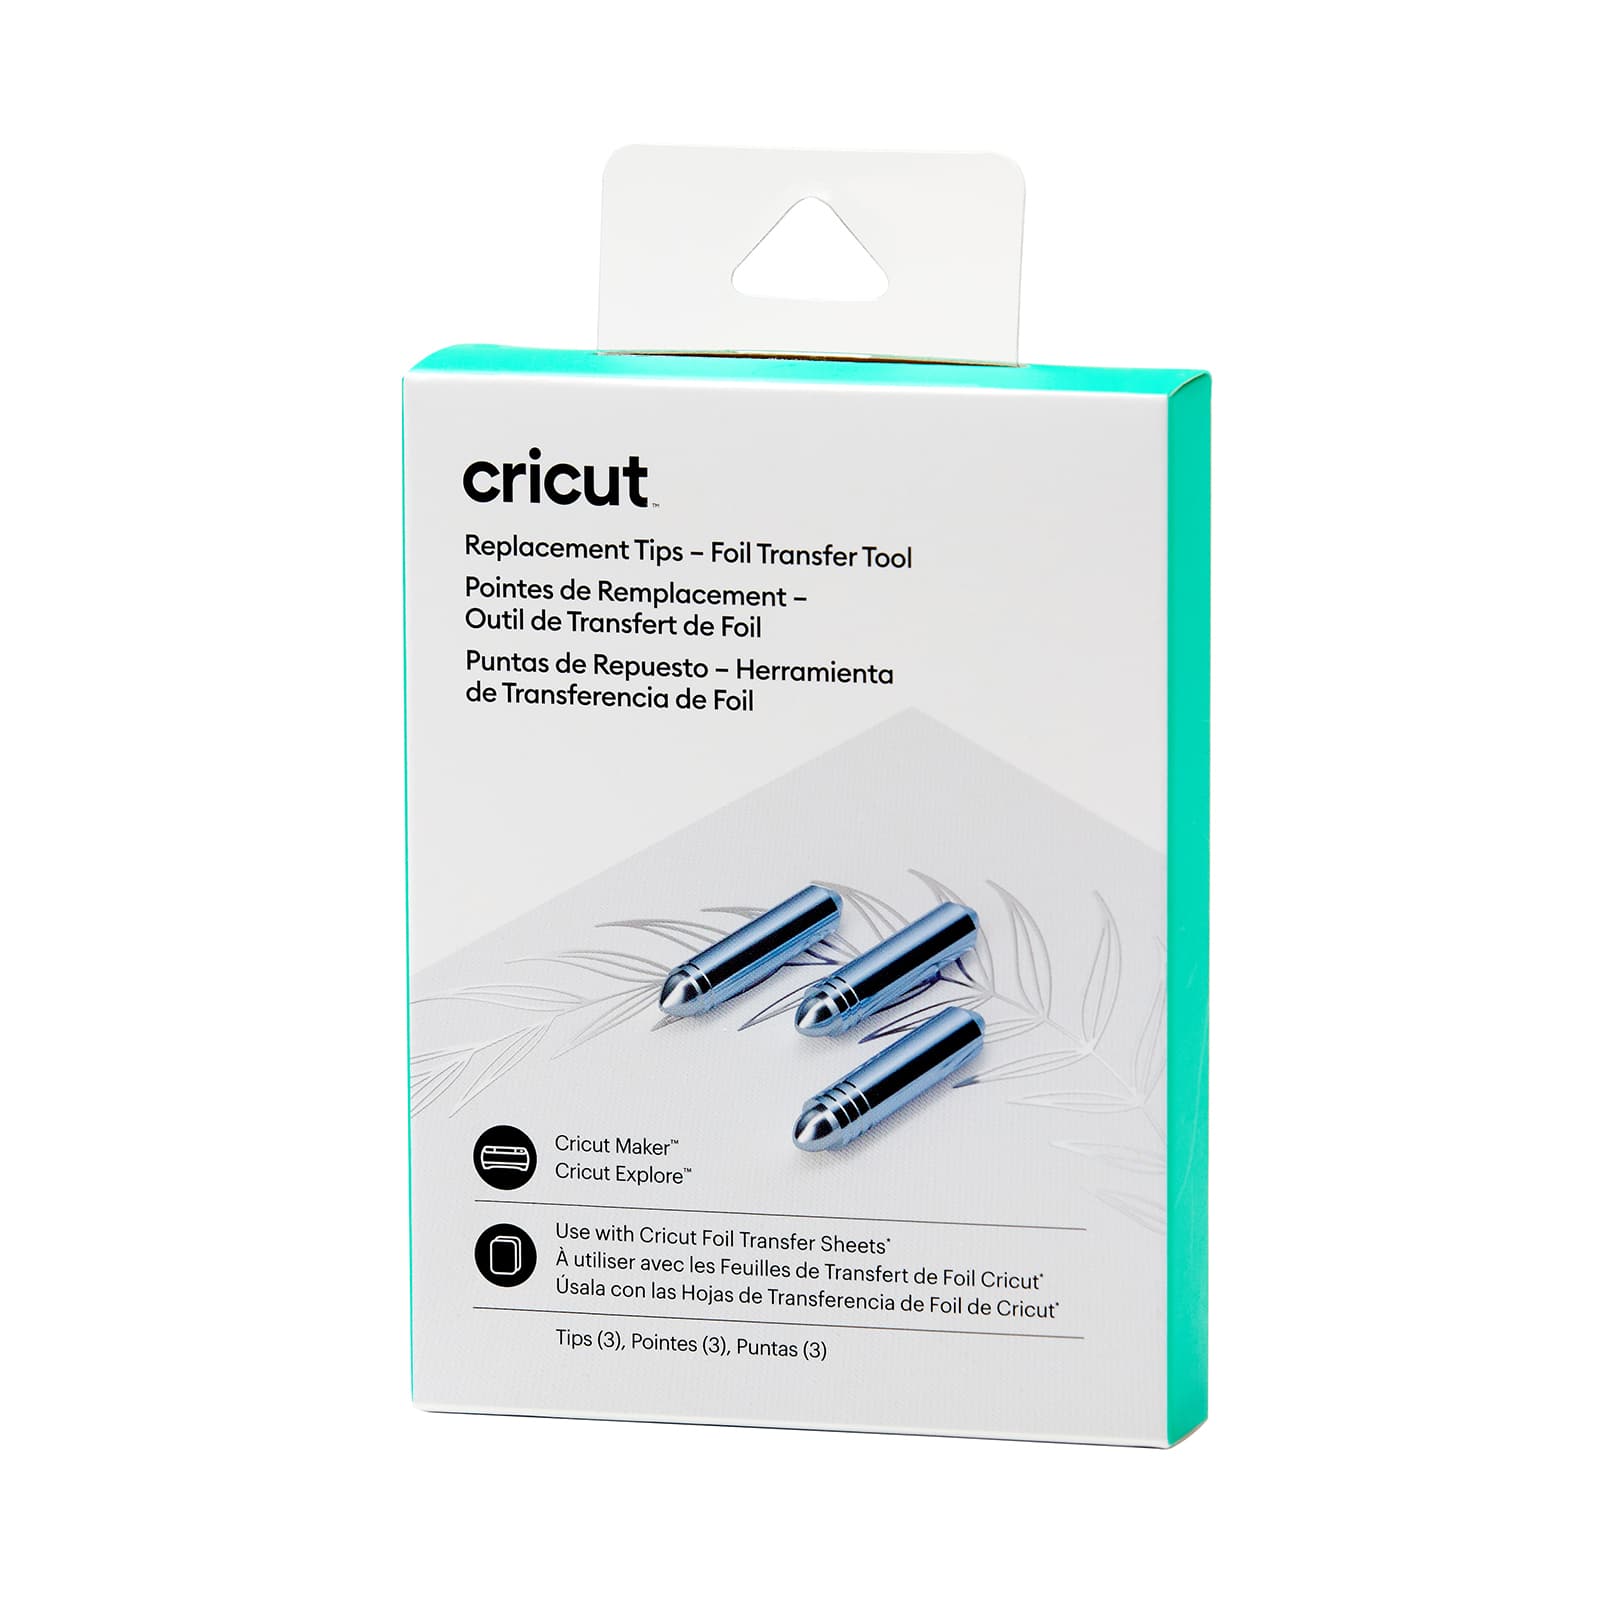 Cricut Replacement tips - Foil transfer tool for Maker and Explore